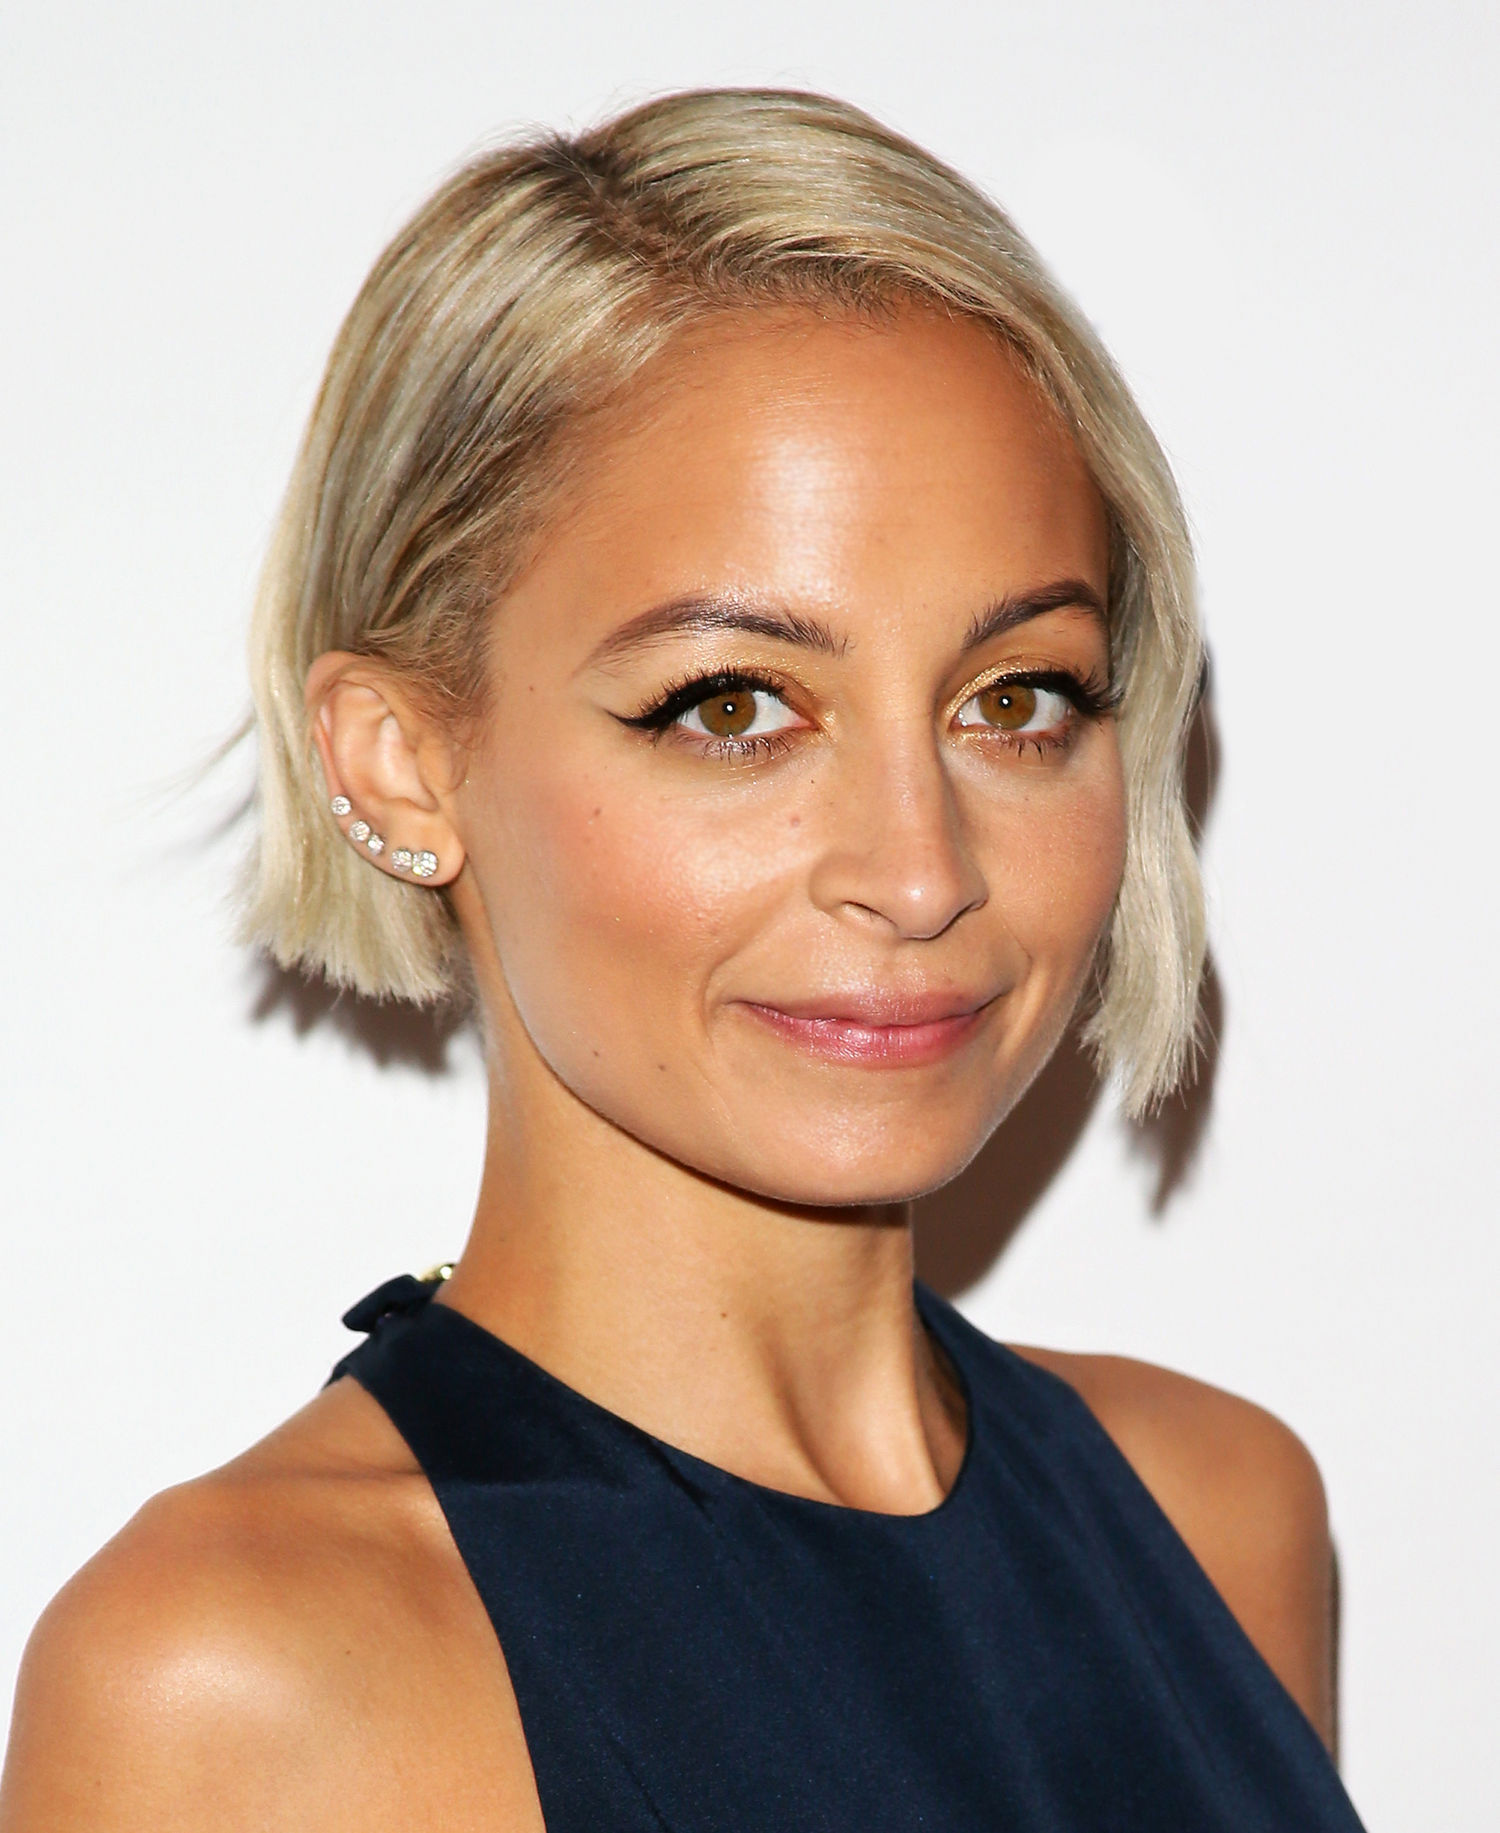 HQ Nicole Richie Wallpapers | File 272.75Kb